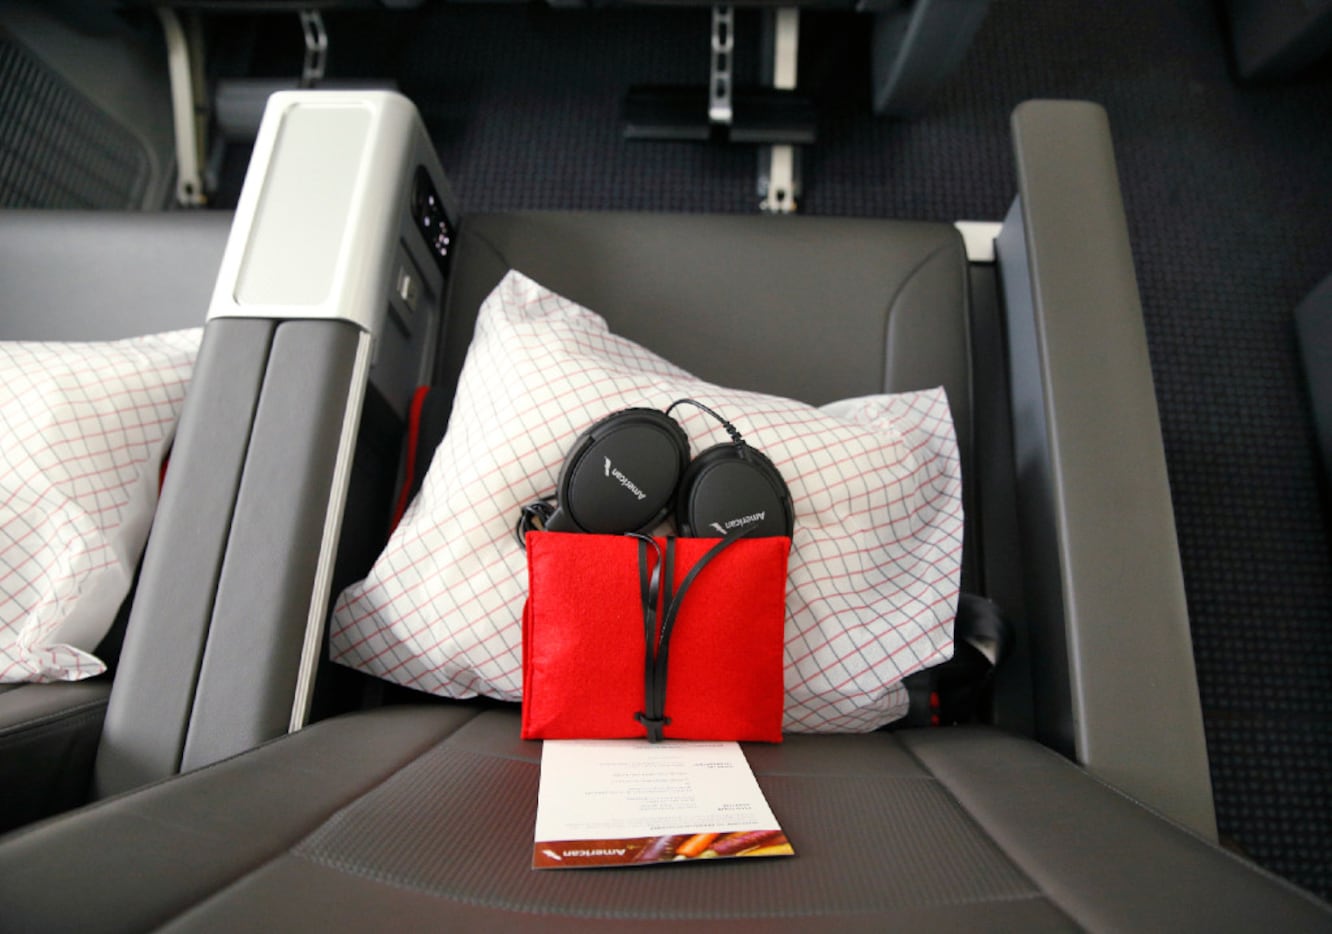 Headphones with a blanket and pillow are offered in American's premium economy cabin seating.